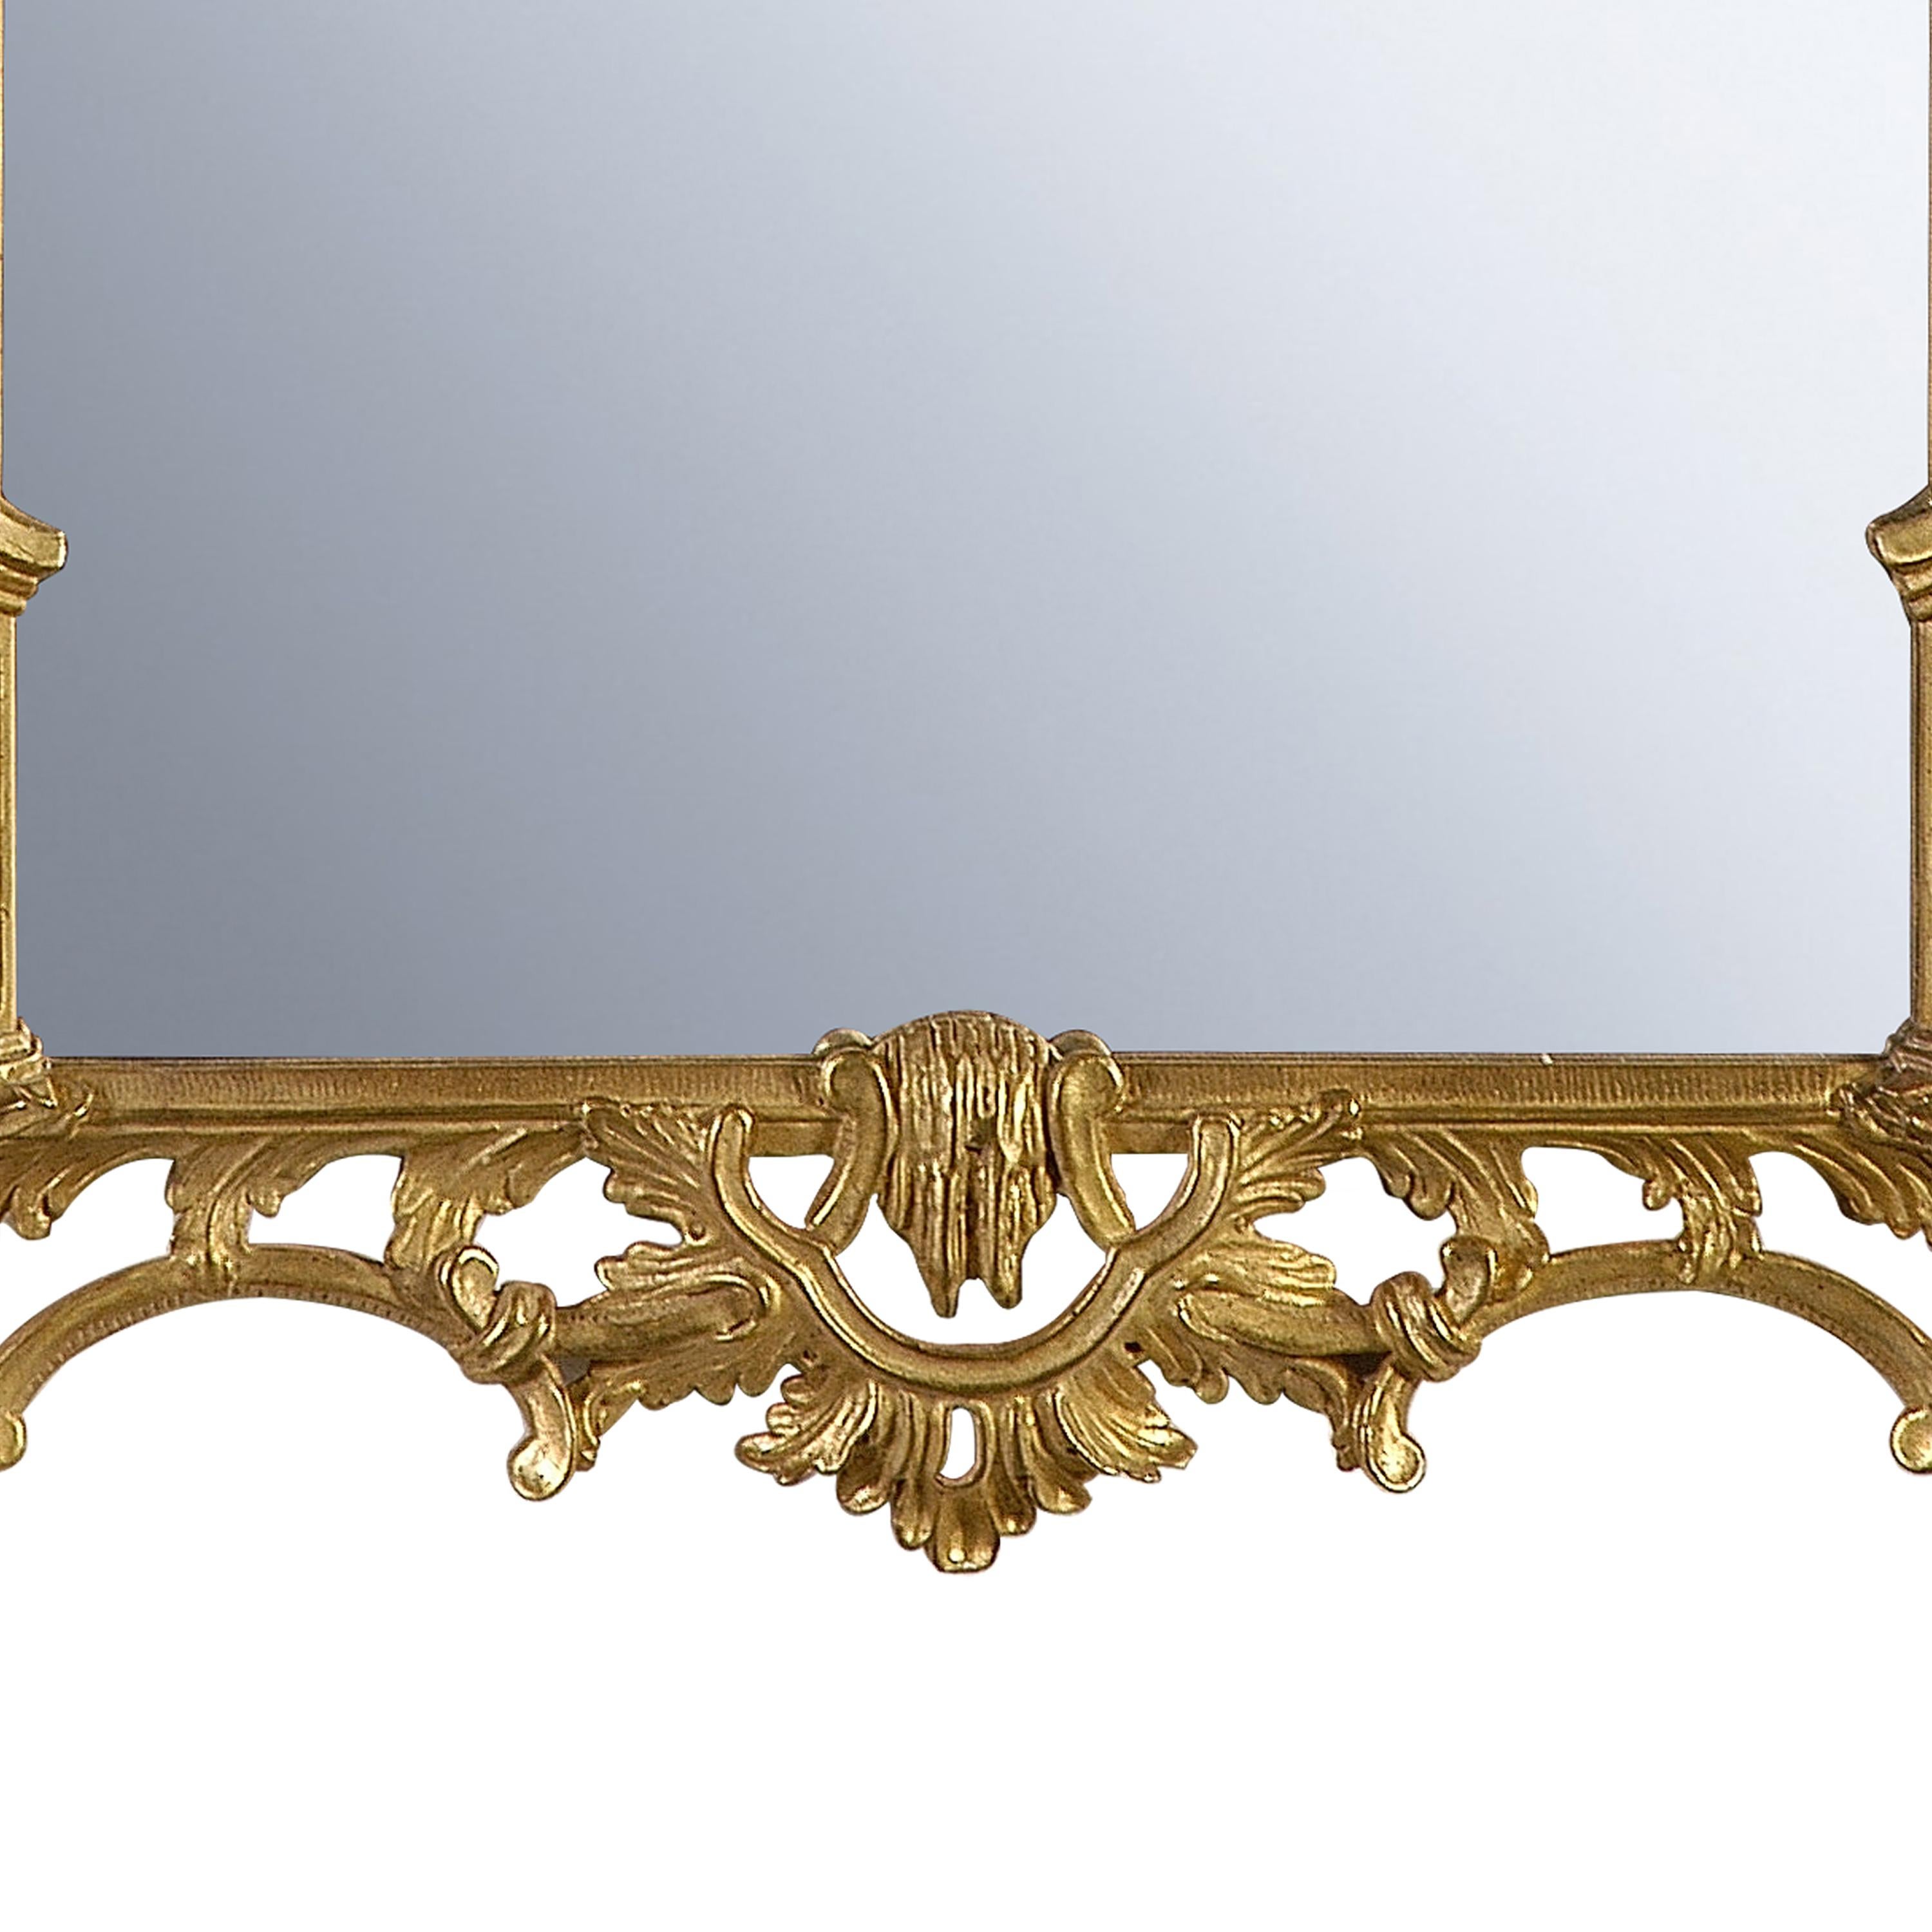 Spanish Neoclassical Rectangular Gold Foil Hand Carved Wooden Mirror, 1970